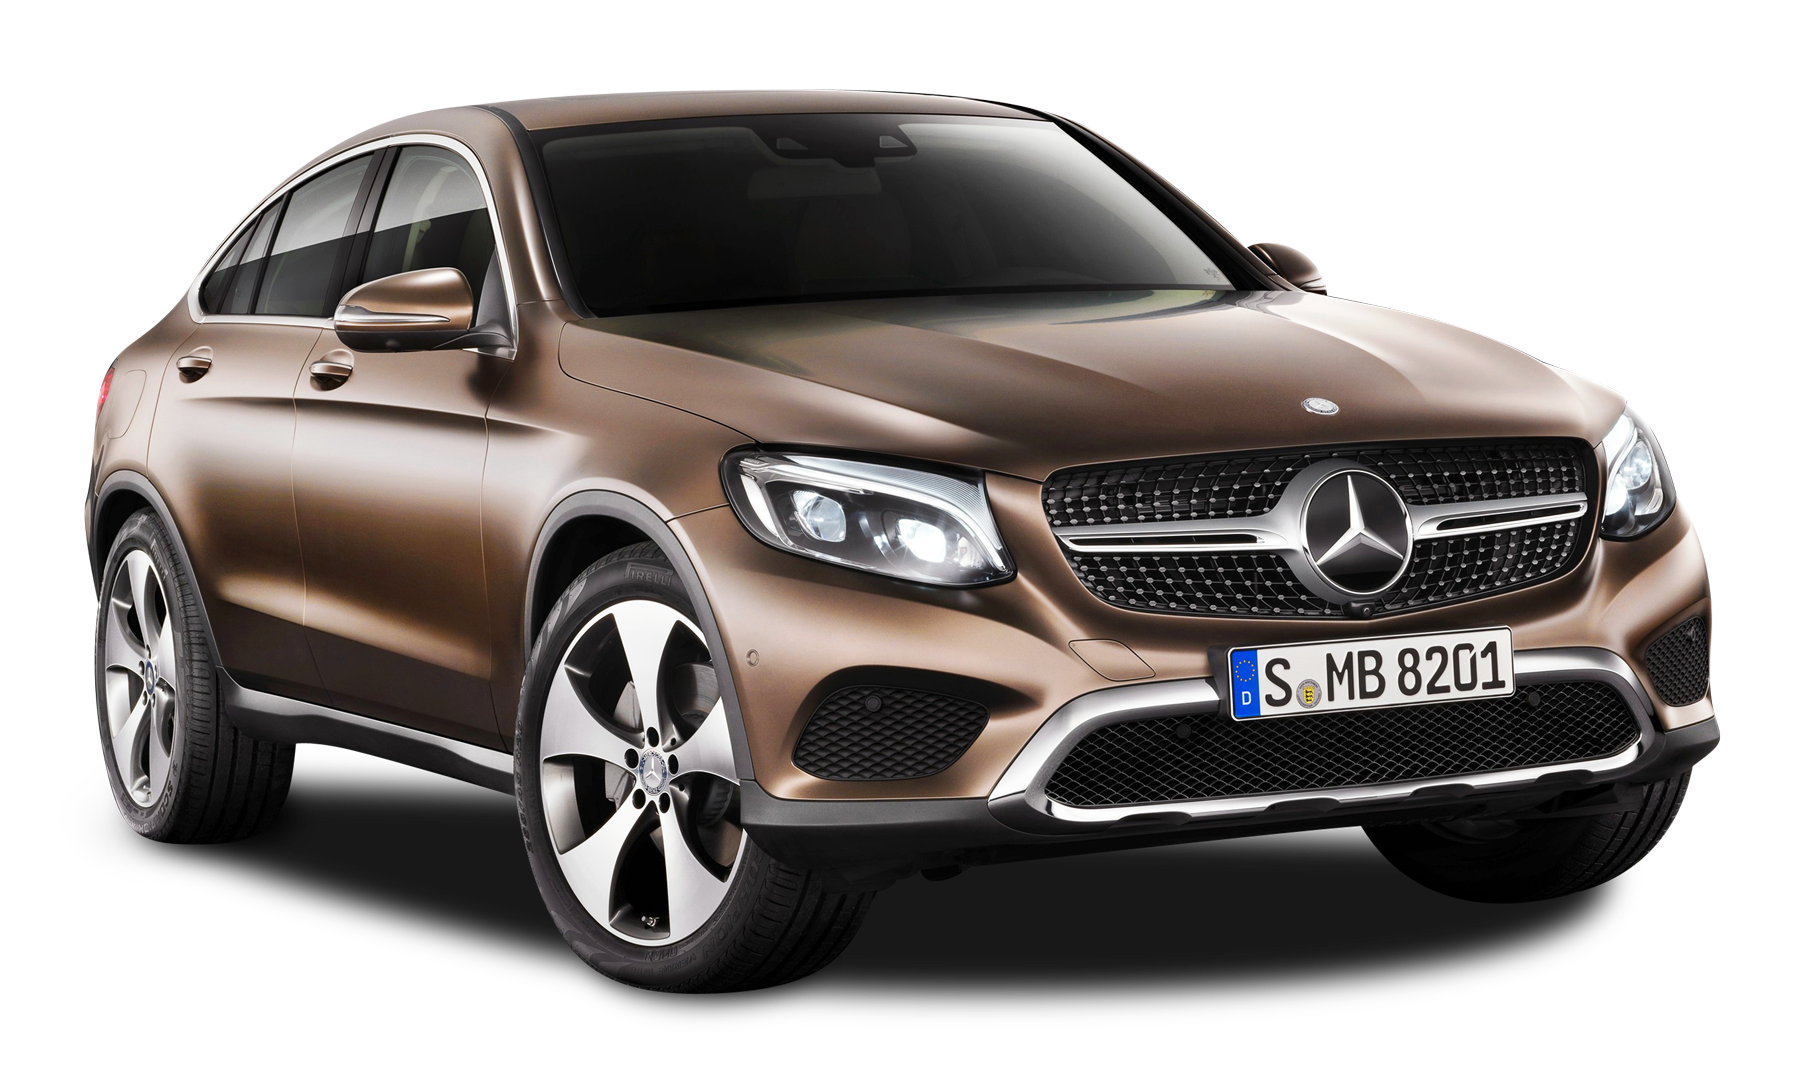 Mercedes PNG images, car pictures.